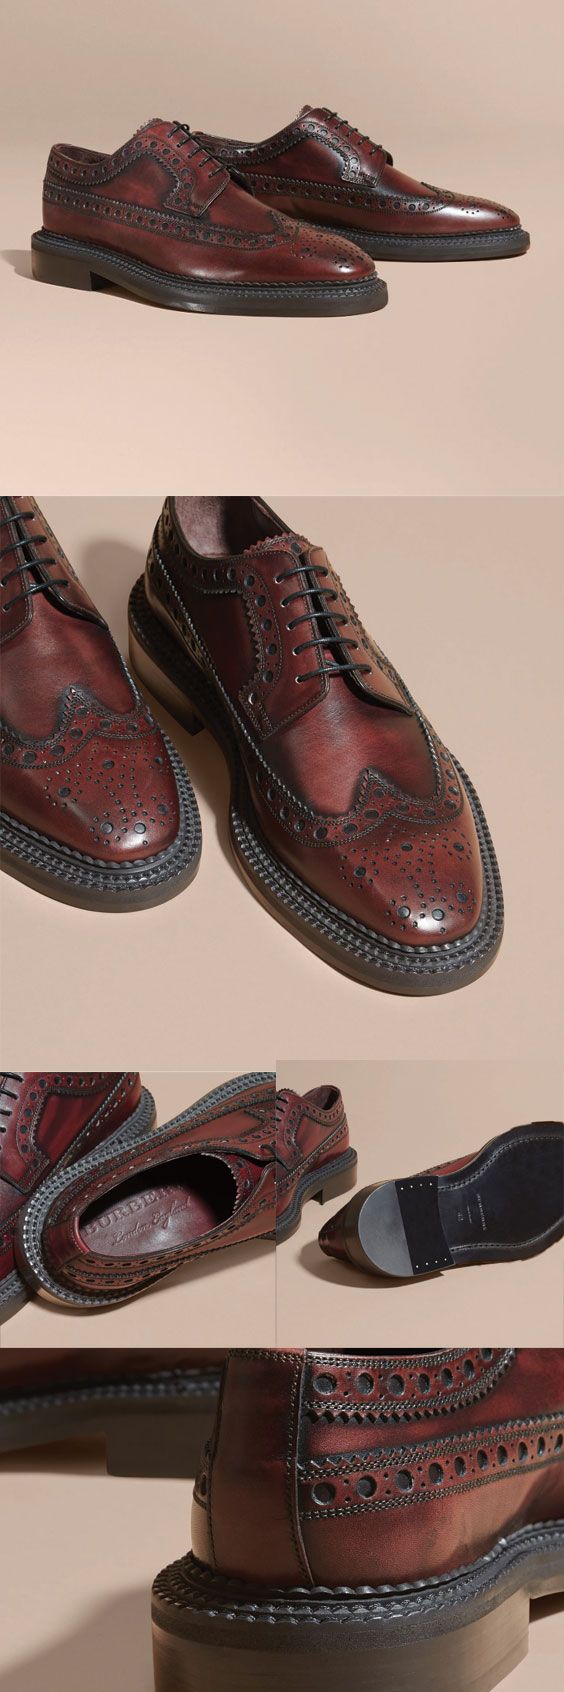 Burberry Leather Derby Brogues $750